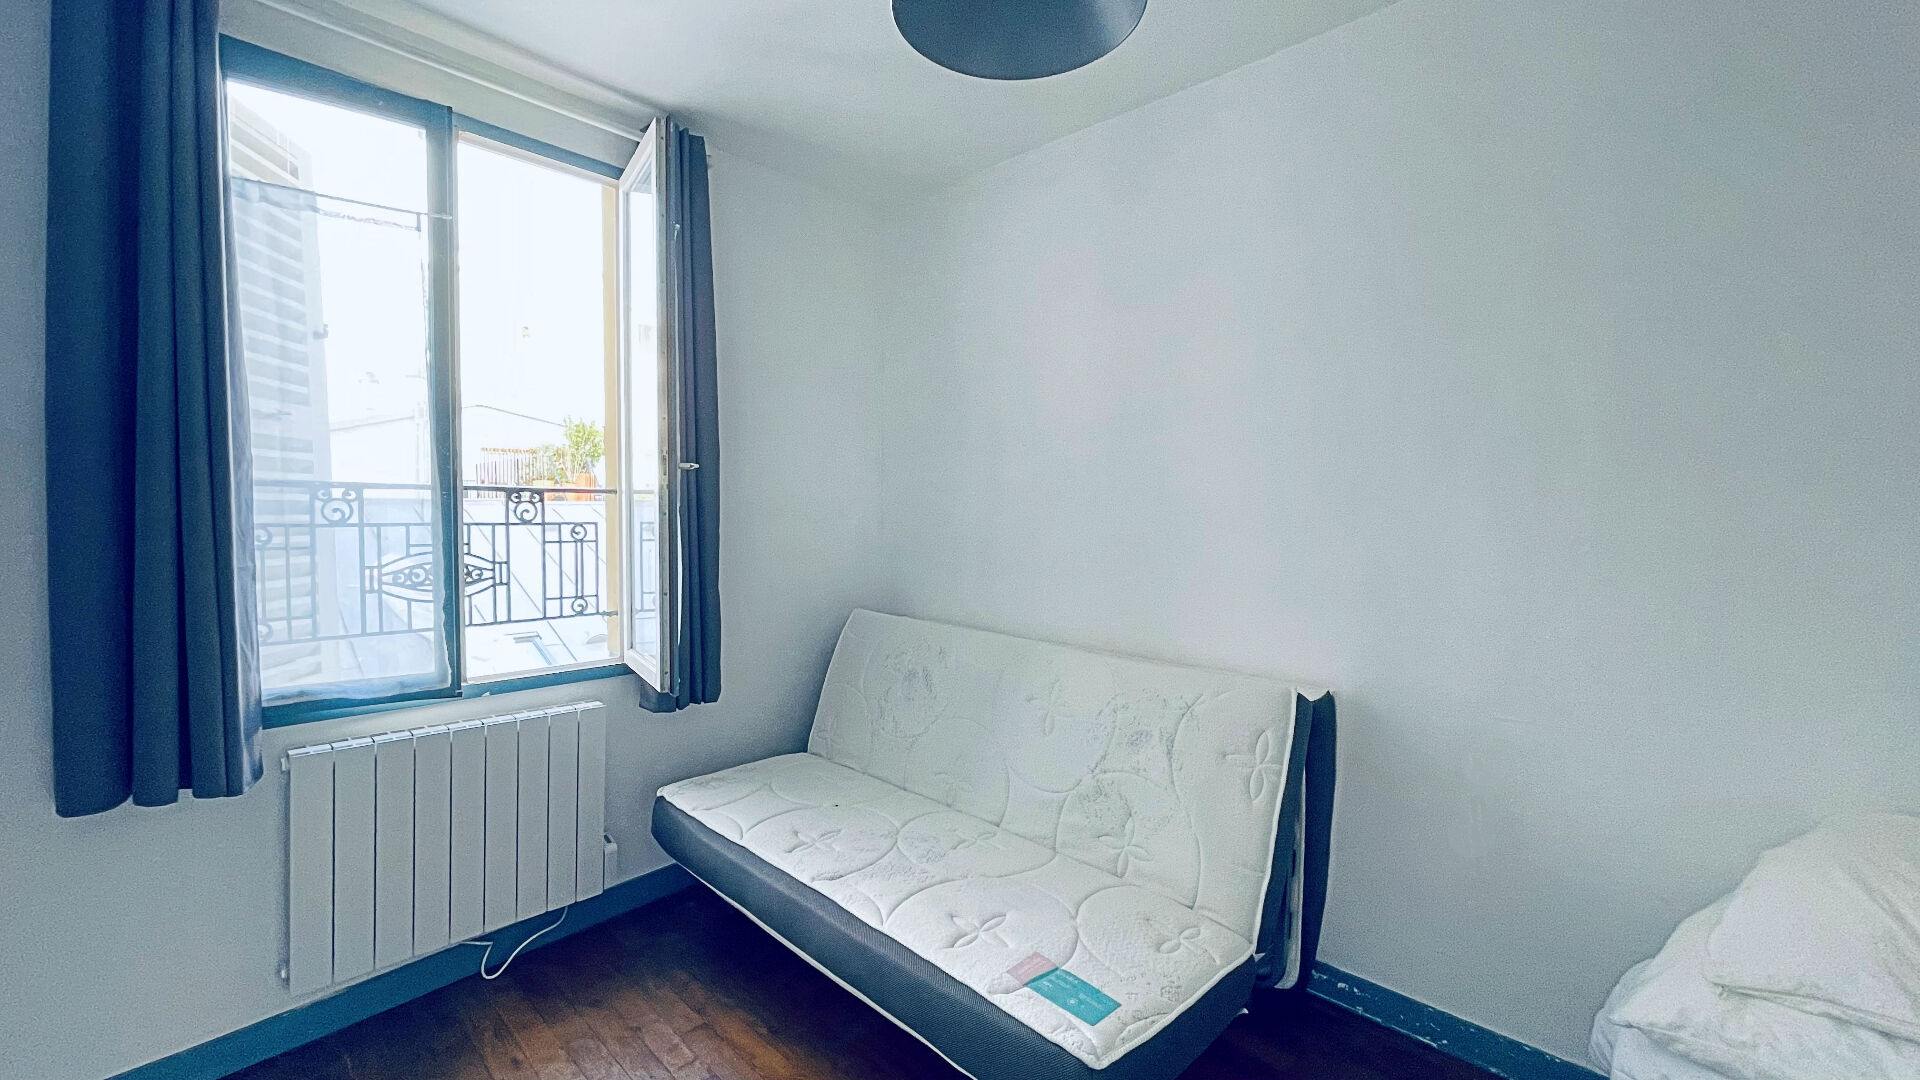 Charming studio with abbesses with open screws! 3